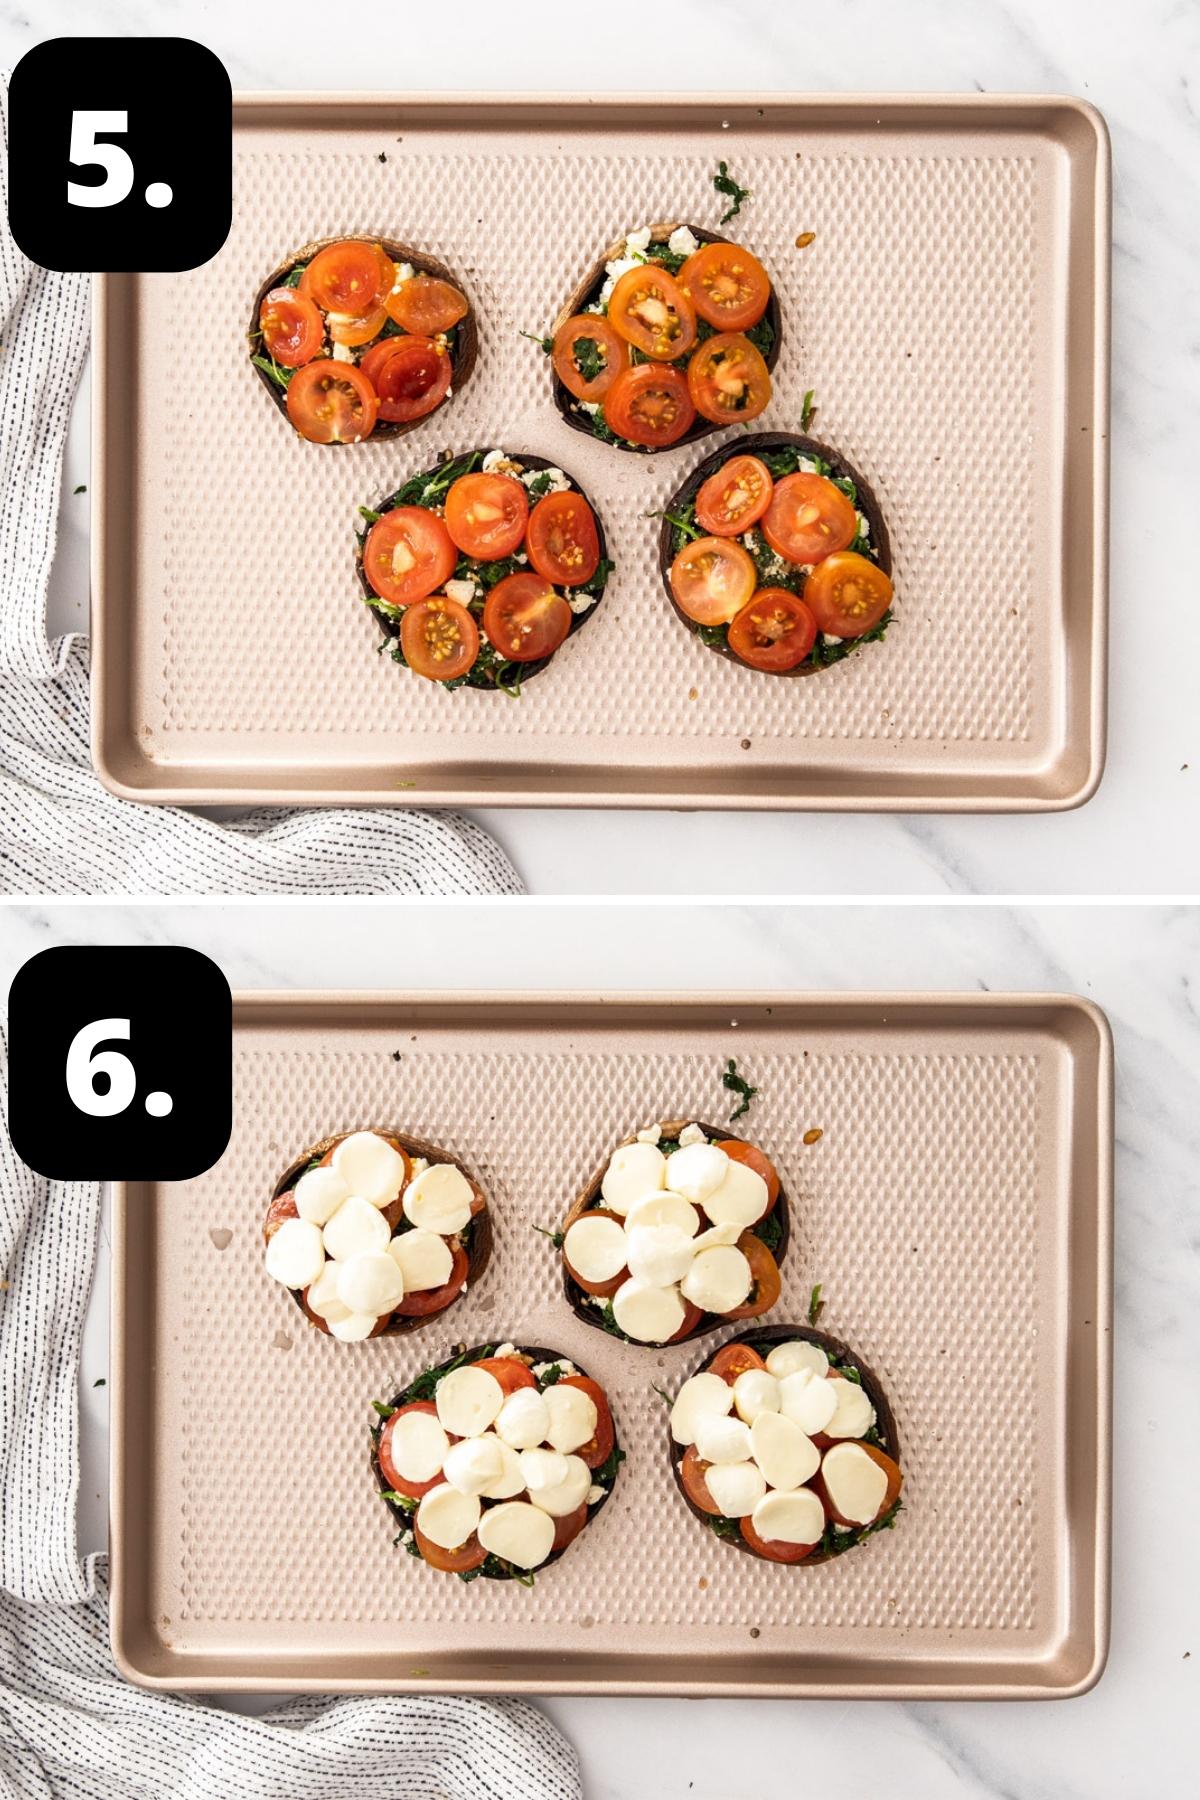 Steps 5-6 of preparing this recipe - adding the spinach filling and tomatoes to the mushrooms and topping with bocconcini.